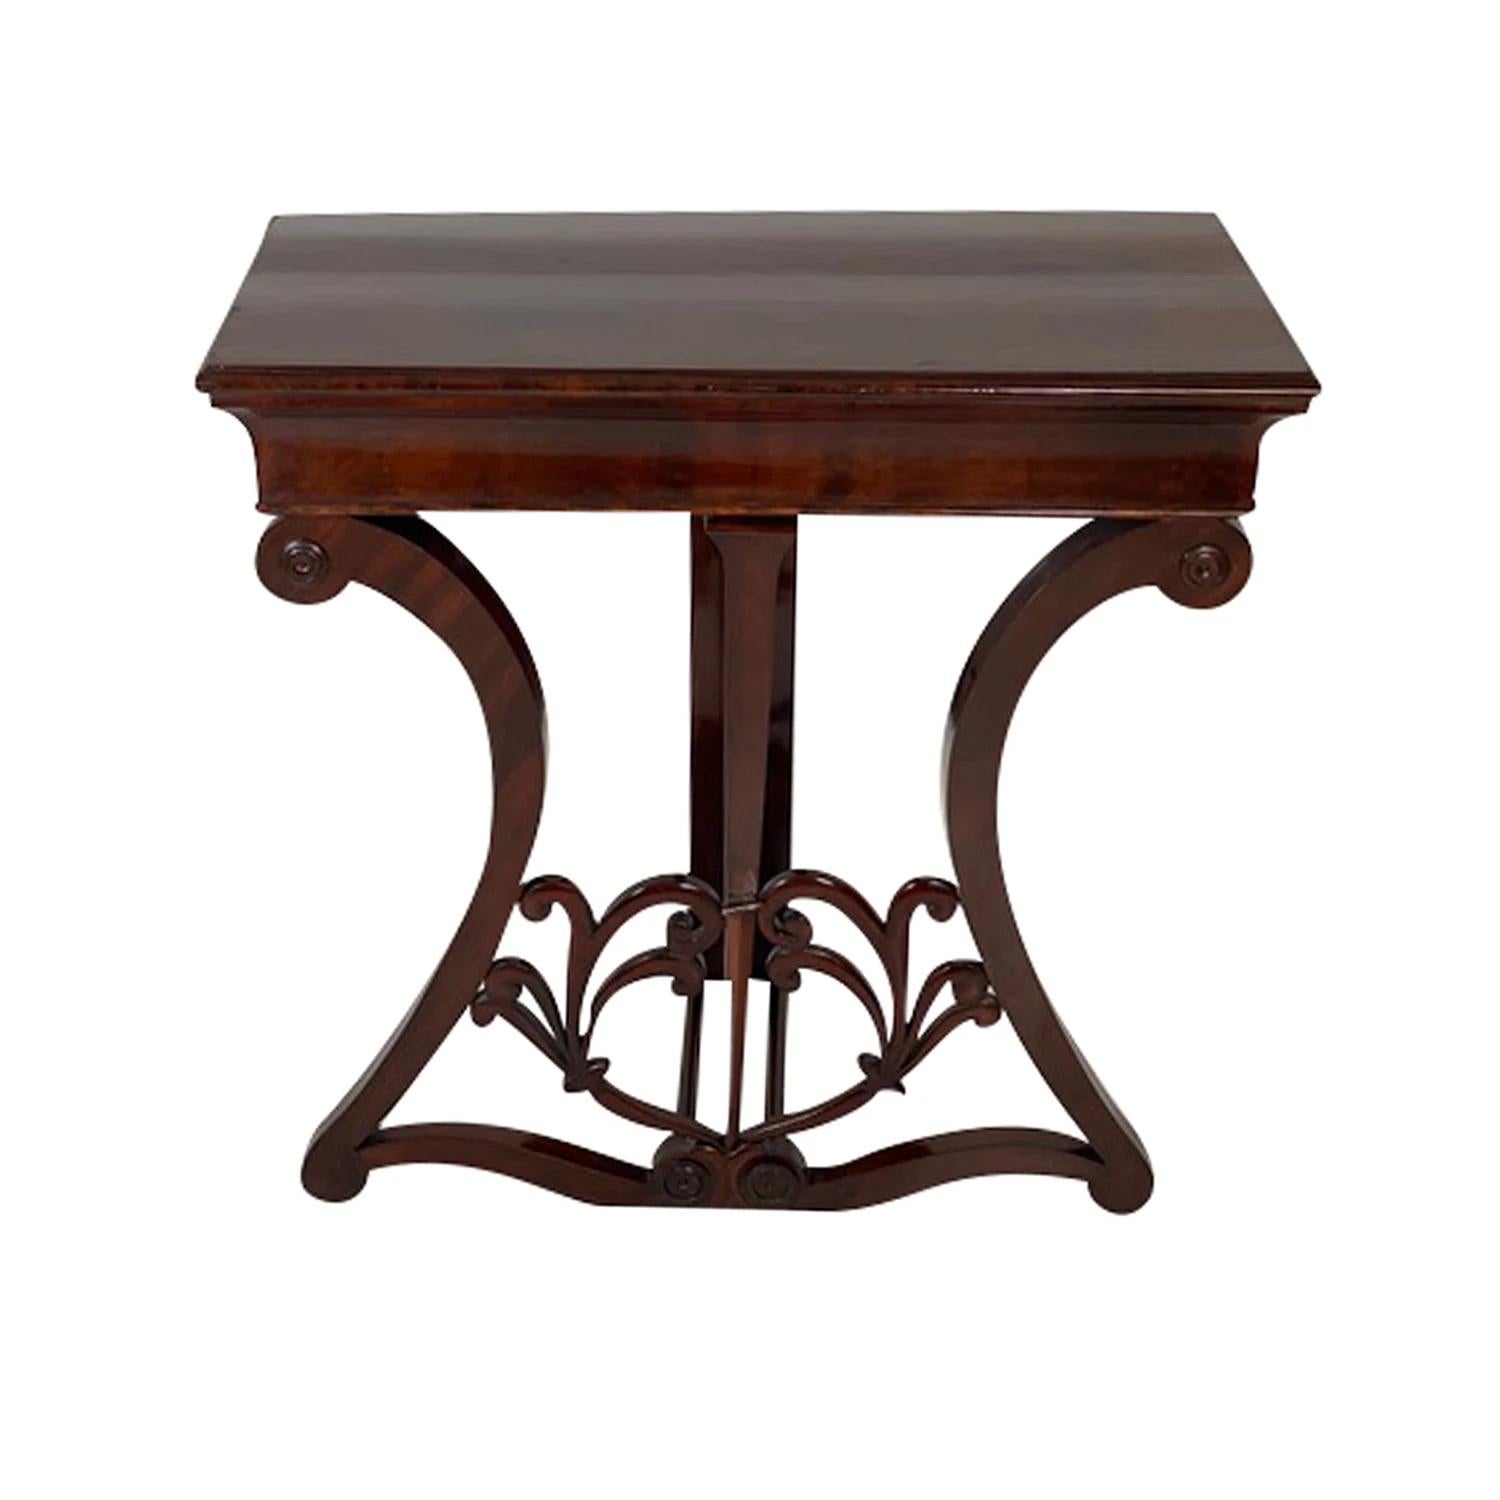 An antique German Biedermeier freestanding console table made of hand crafted Walnut, shellac polished and partly veneered in good condition. The particularized carved table is supported by a straight wooden leg, standing on two detailed arched